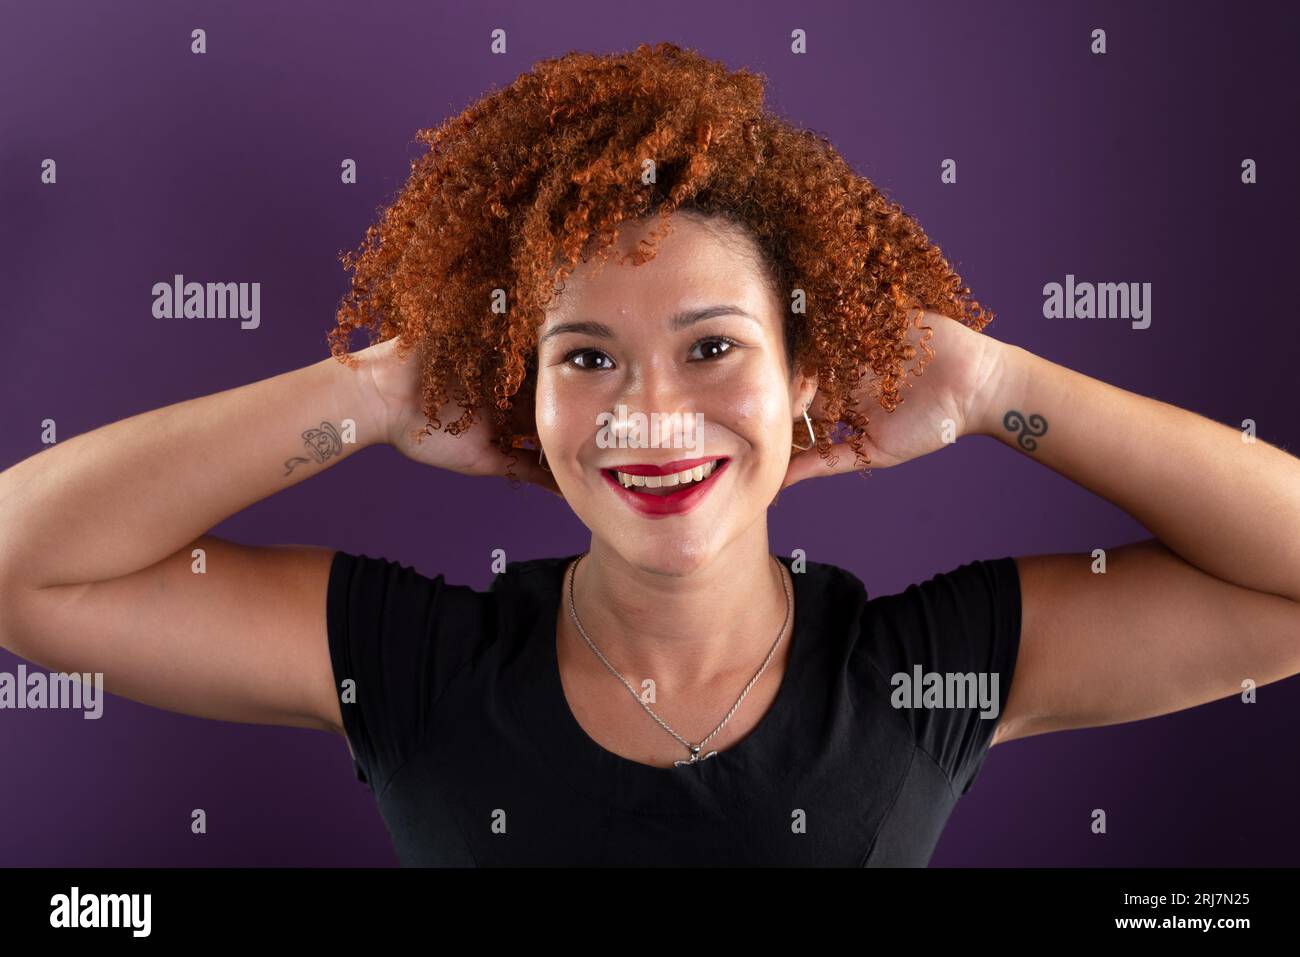 an attractive red-haired woman posing for a photo in black clothing touching her hair. Confident and happy. Isolated on lilac colored background. Stock Photo